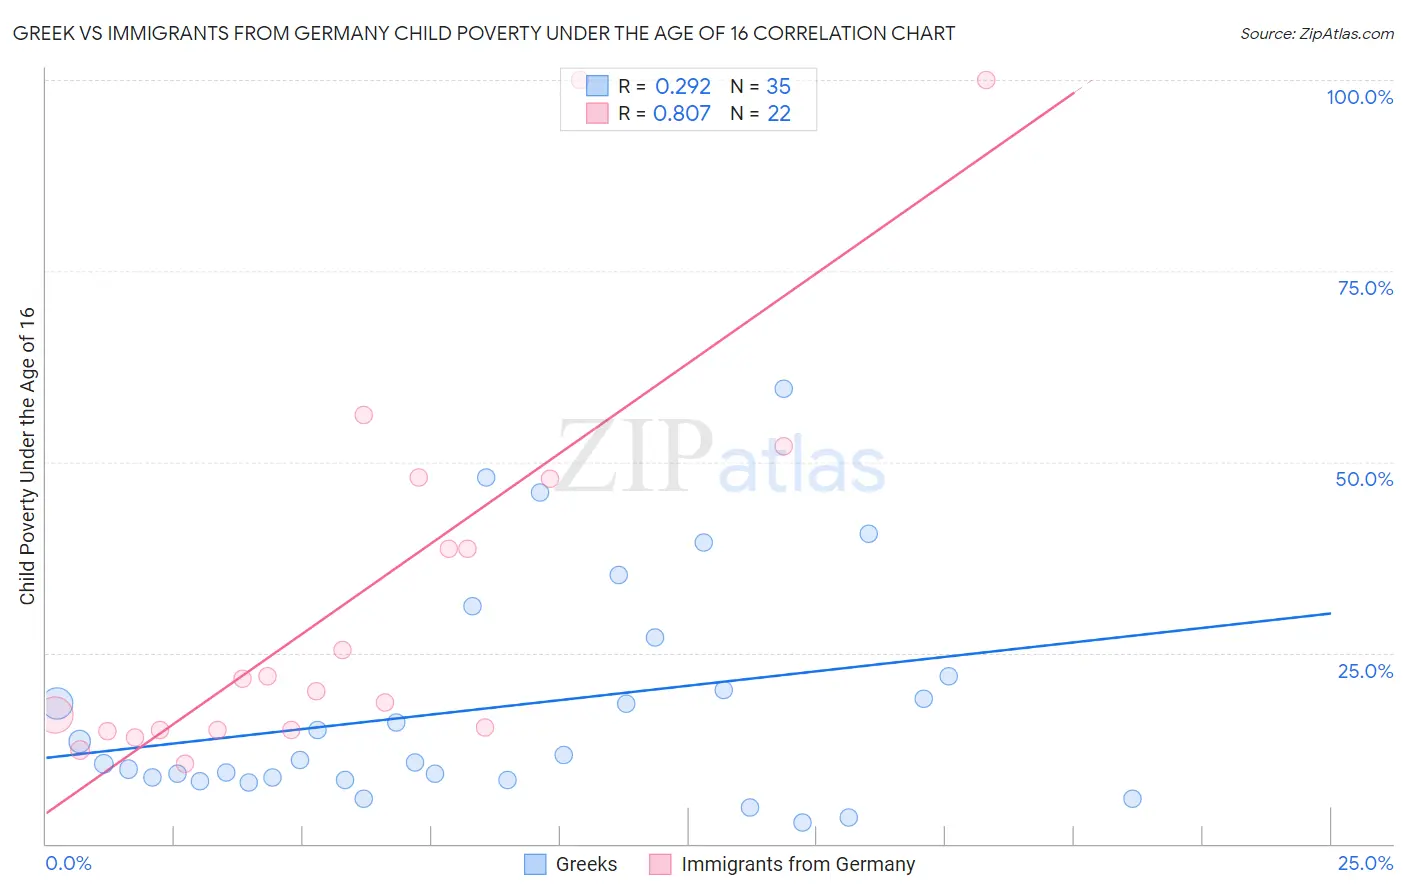 Greek vs Immigrants from Germany Child Poverty Under the Age of 16